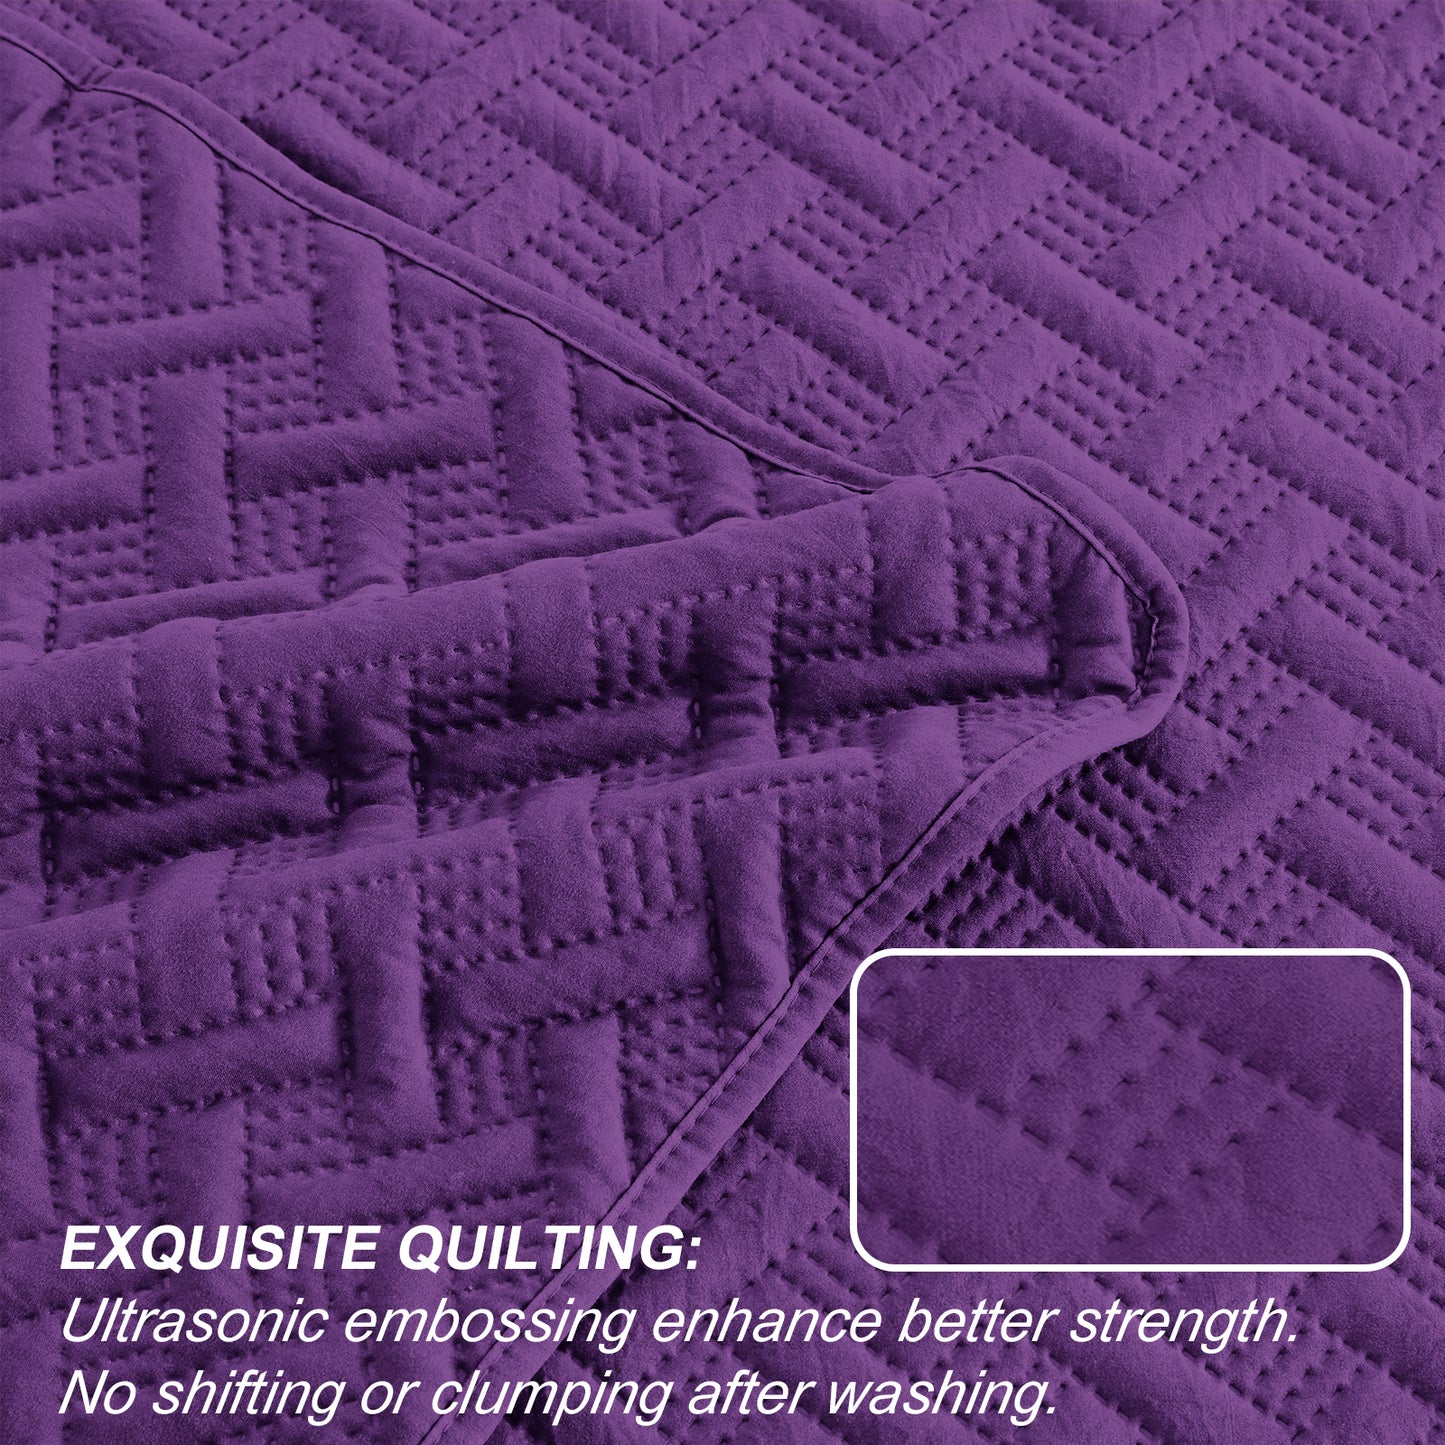 Exclusivo Mezcla 2-Piece Deep Purple Twin Size Quilt Set, Weave Pattern Ultrasonic Lightweight and Soft Quilts/Bedspreads/Coverlets/Bedding Set (1 Quilt, 1 Pillow Sham) for All Seasons